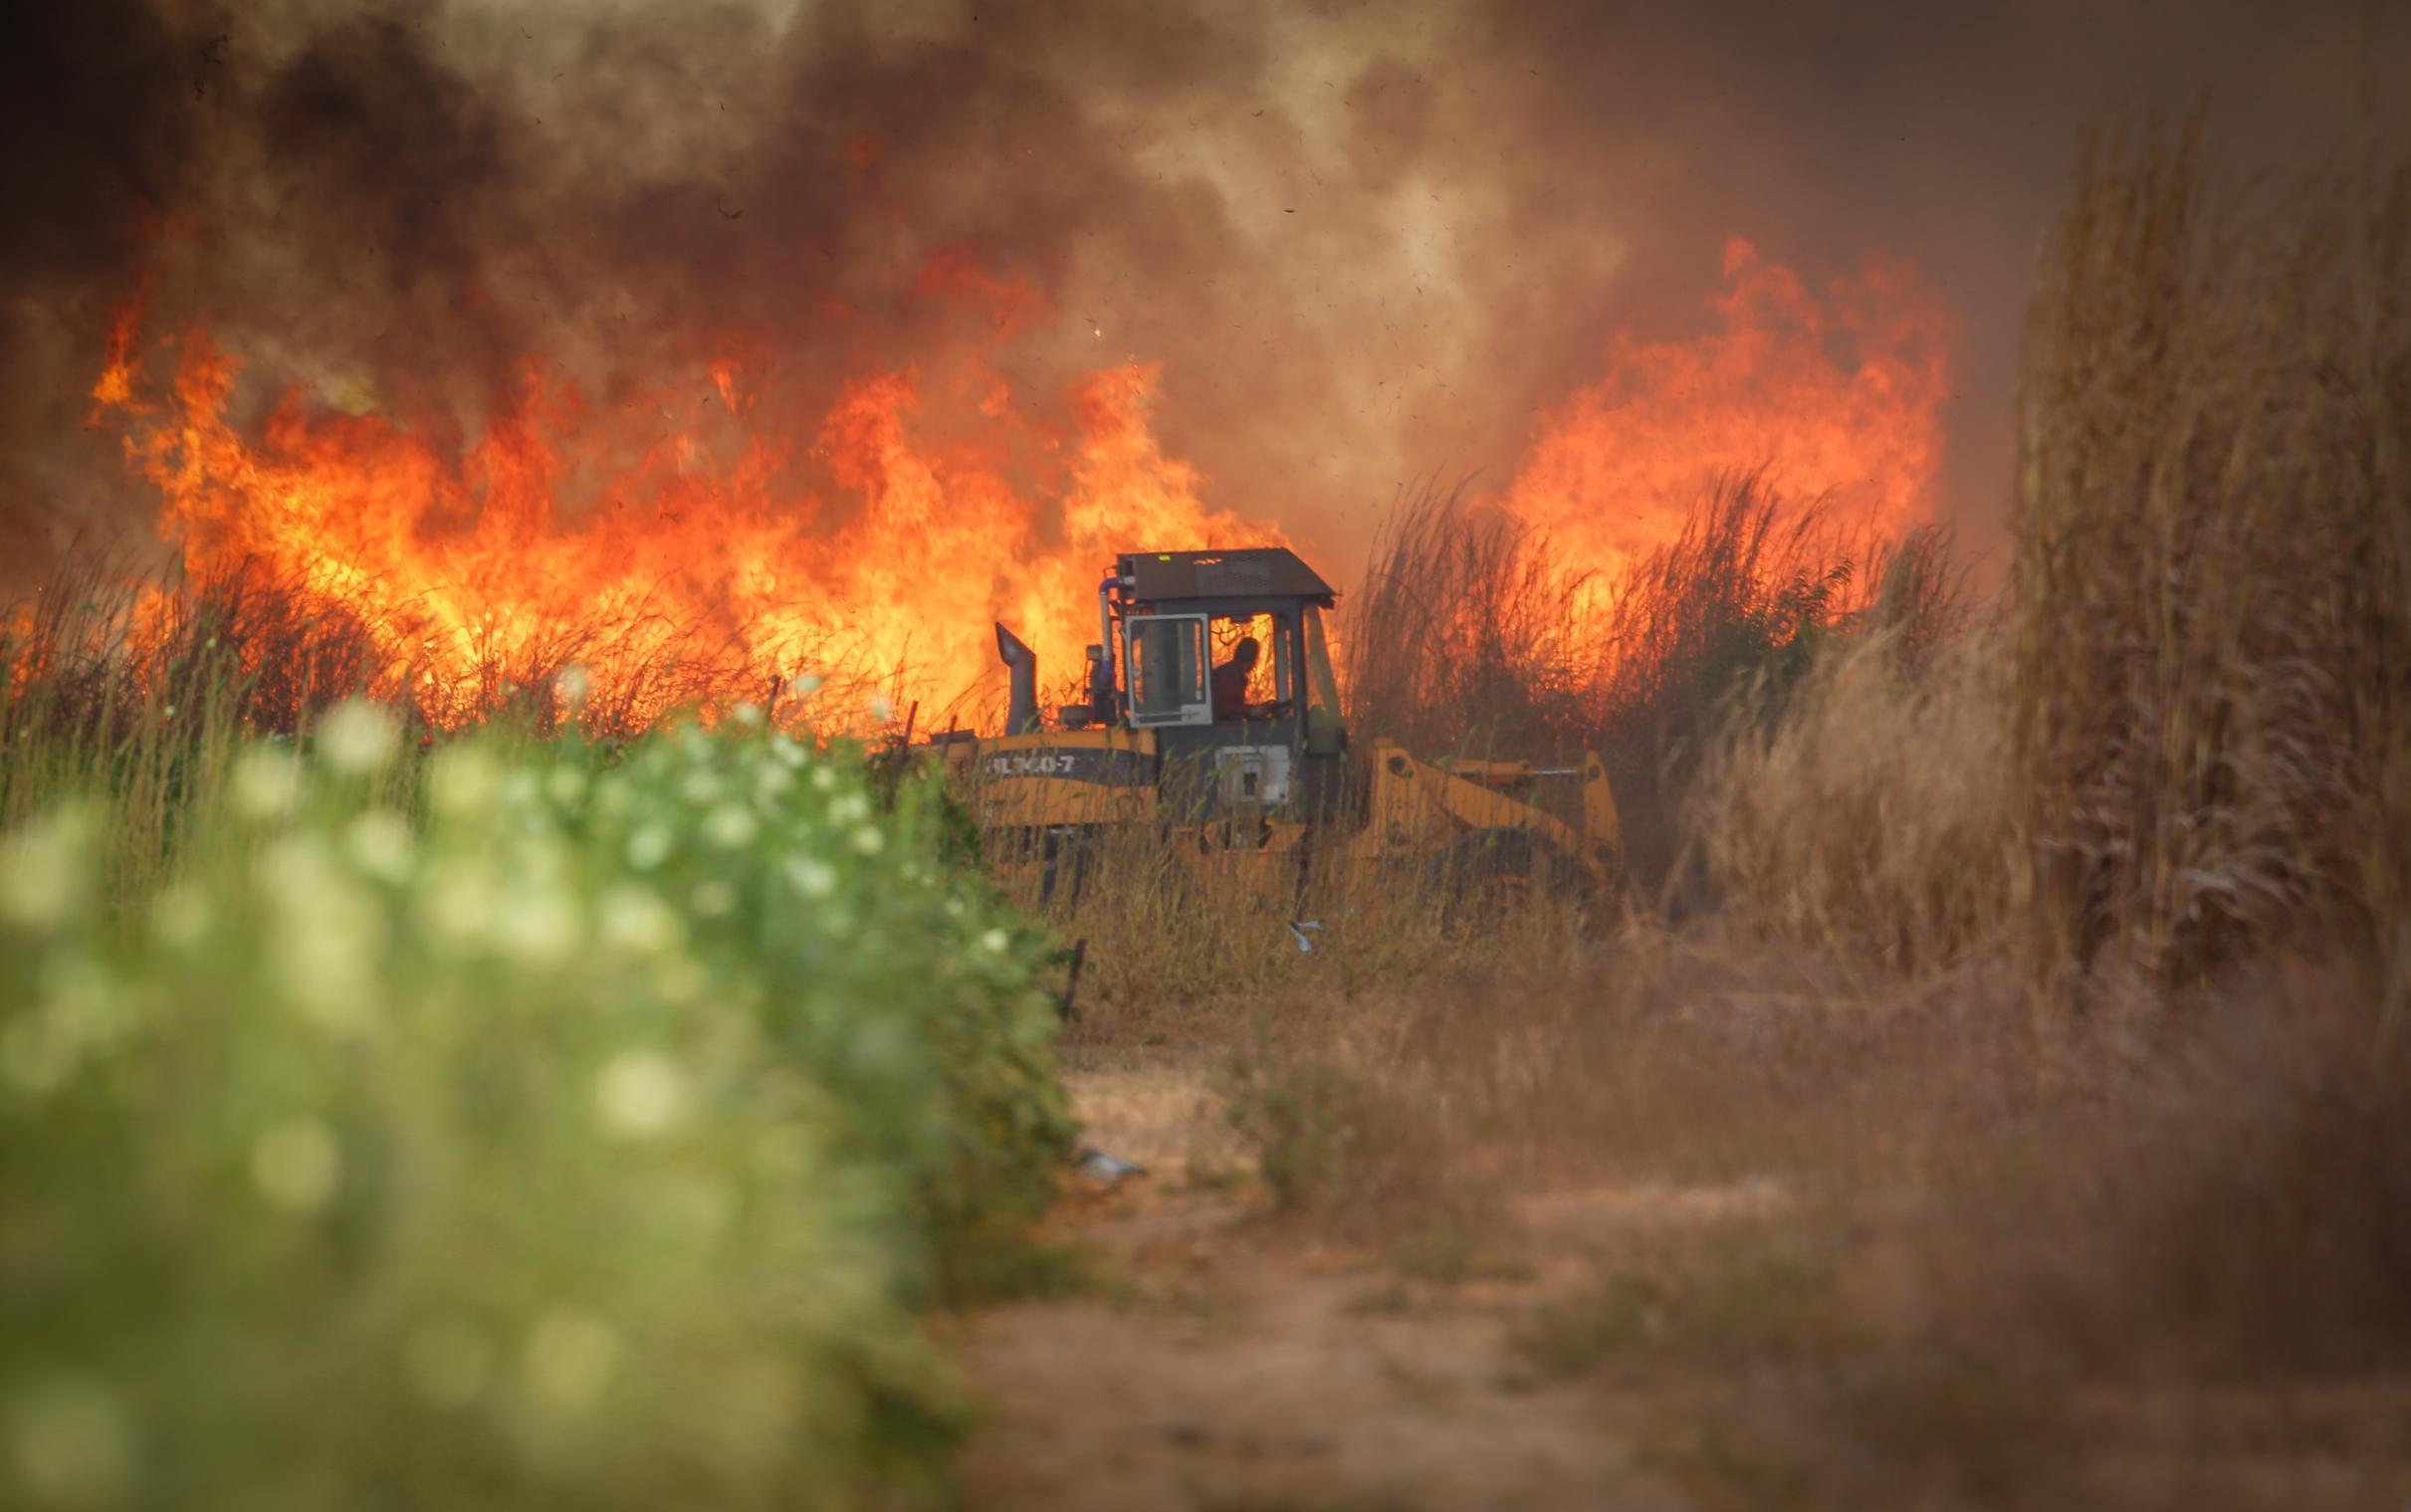 A Gamba Grass fire in Humpty Doo. Green vegetation in foreground, brown gamba, smoke and flames in the top half of the photo.